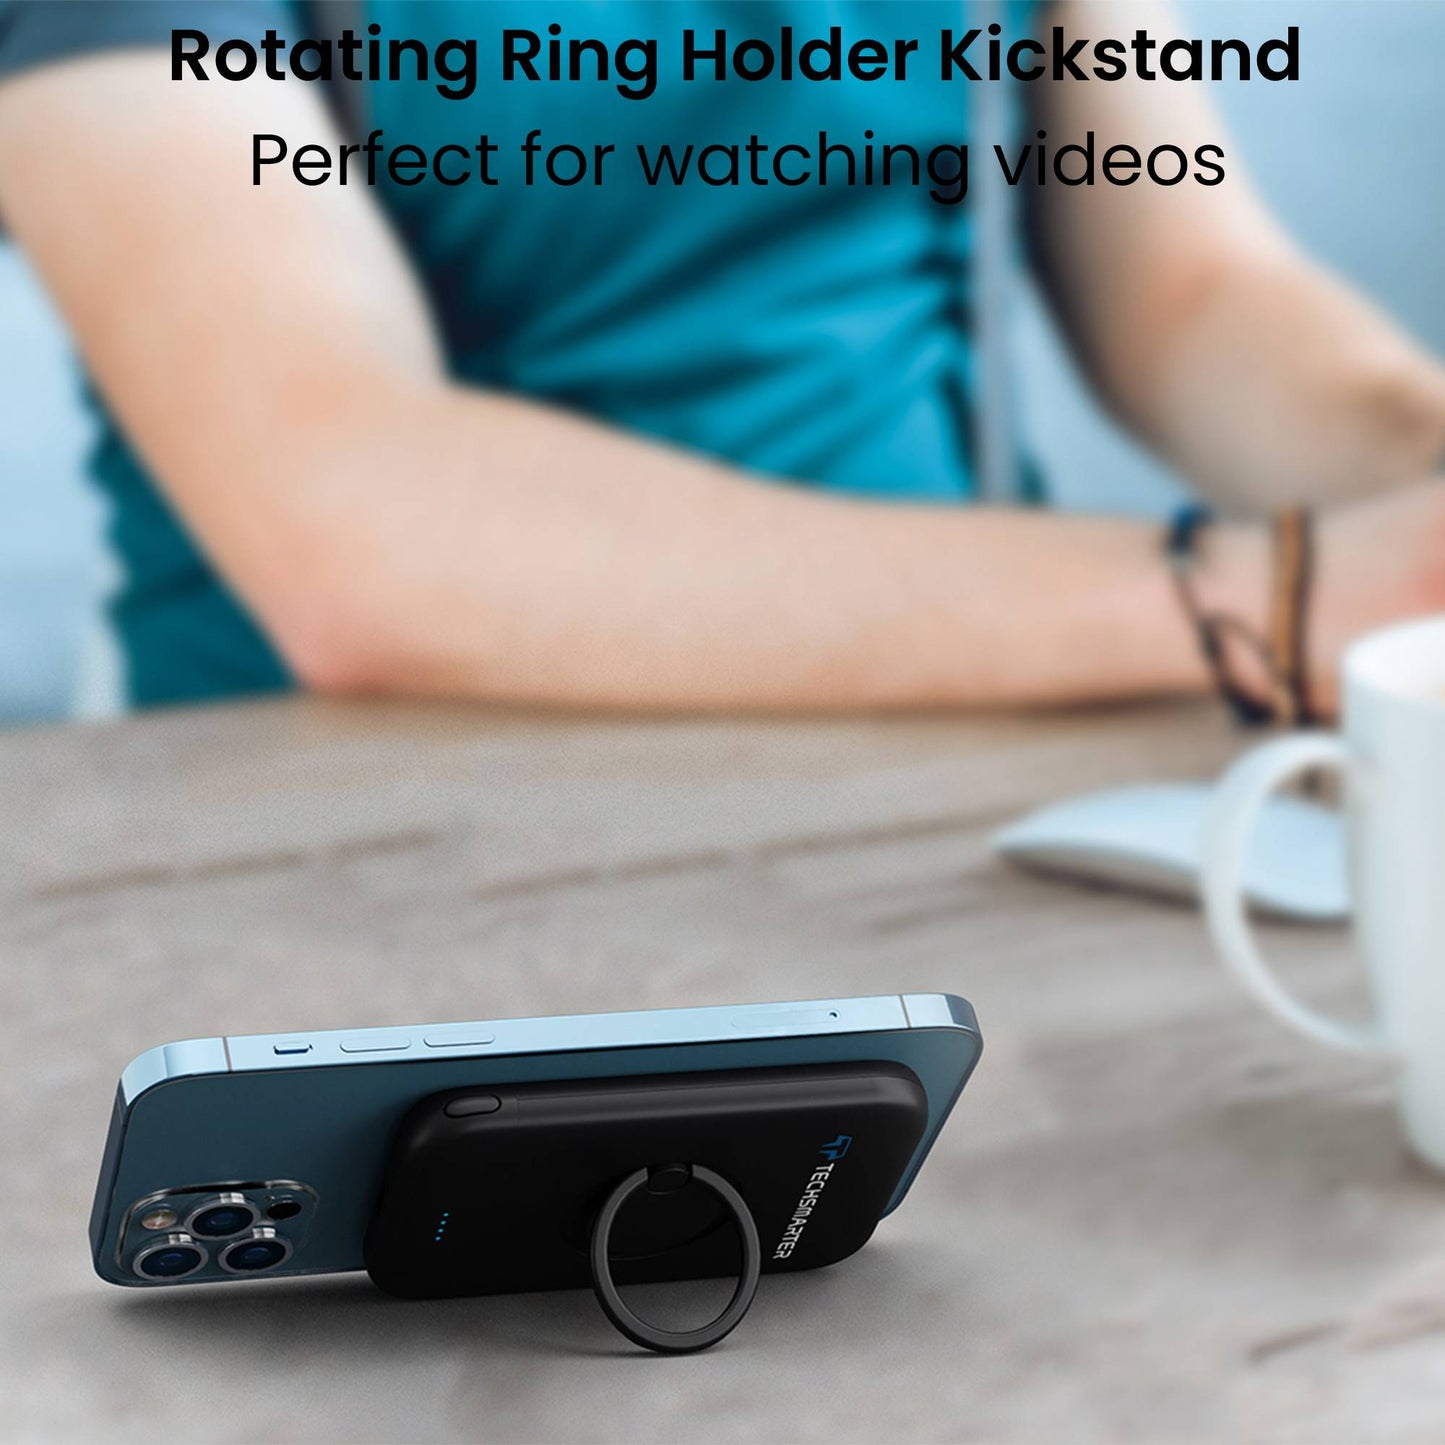 MagBoost Portable Charger 5K Ring - TechsmarterTechsmarter